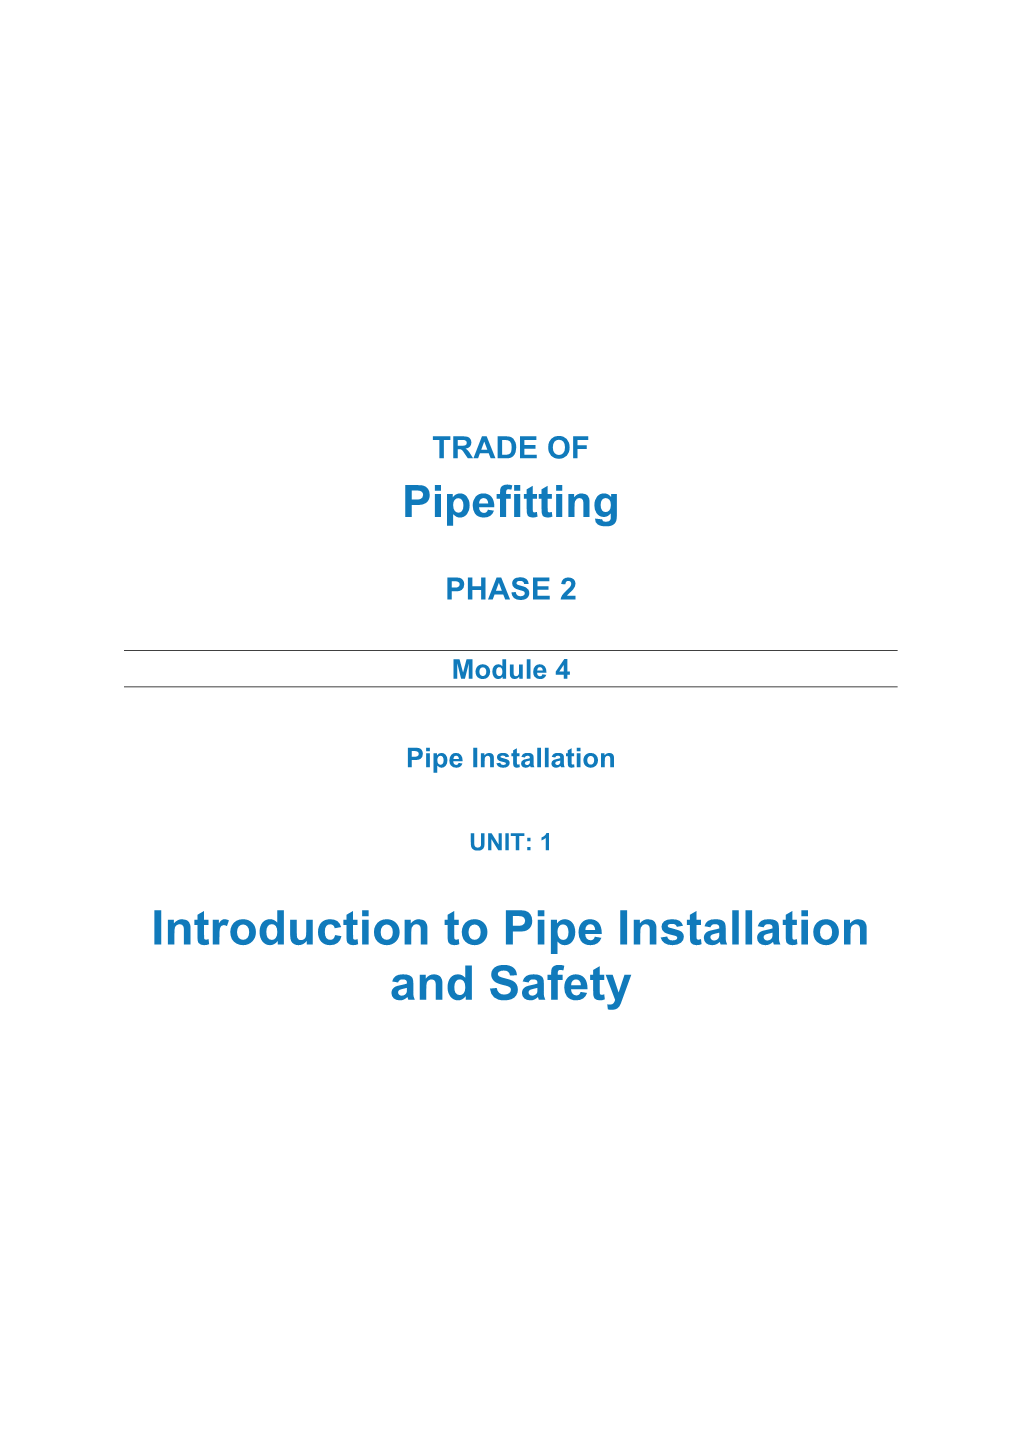 Introduction to Pipe Installation and Safety